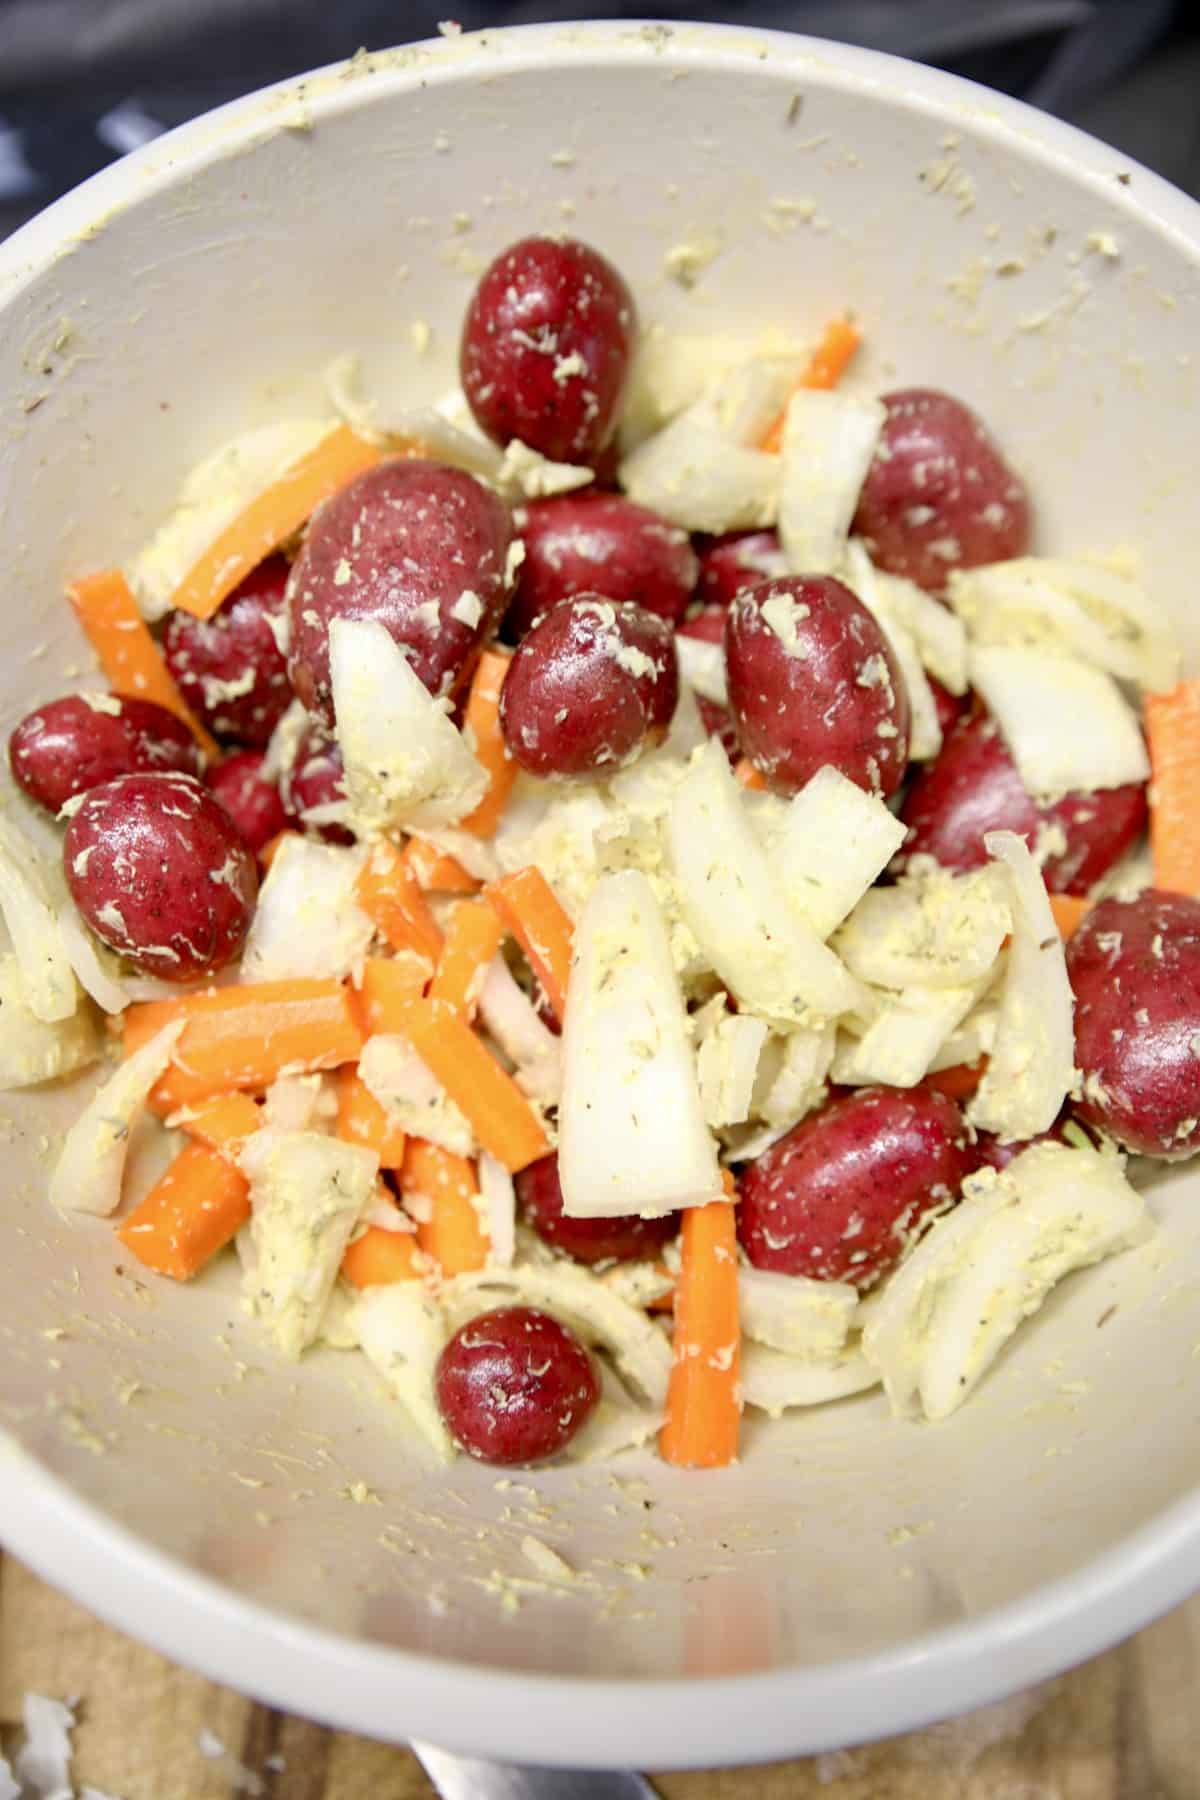 Bowl of potatoes, onions, carrots with butter and seasonings.